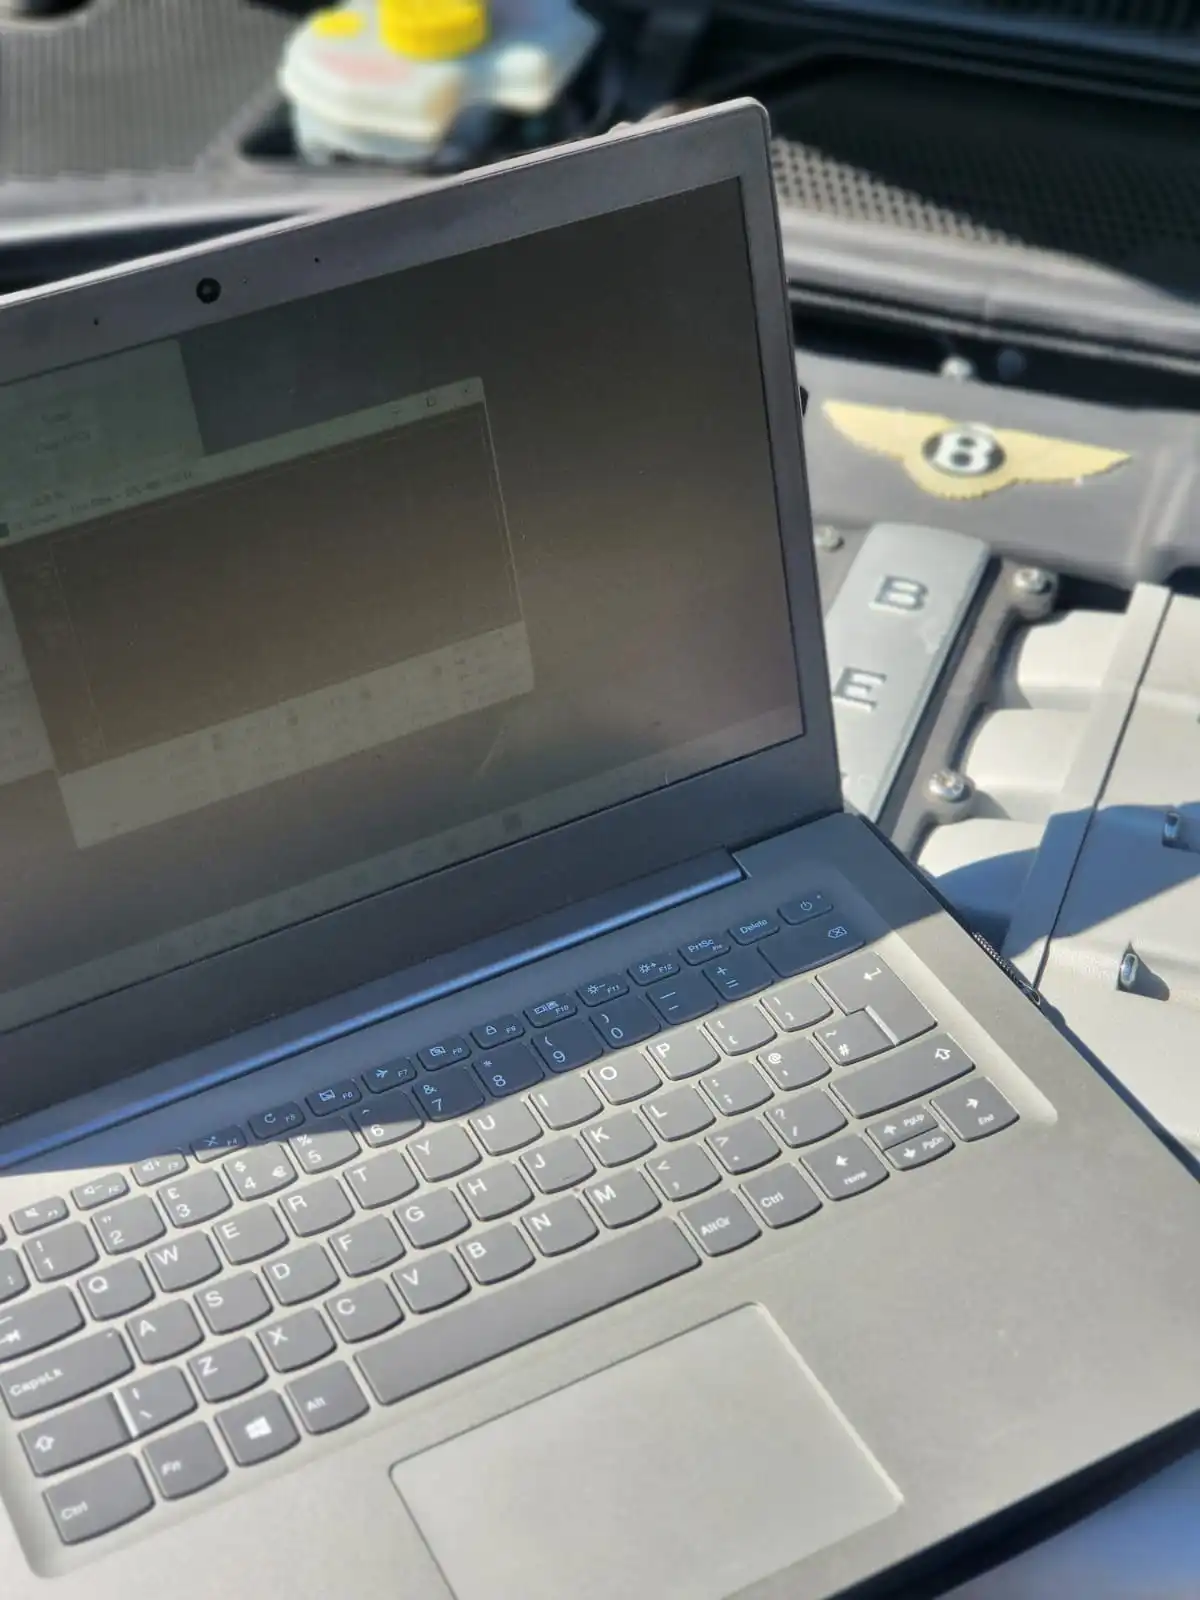 diagnostic test being performed on a car, involving specialist software.